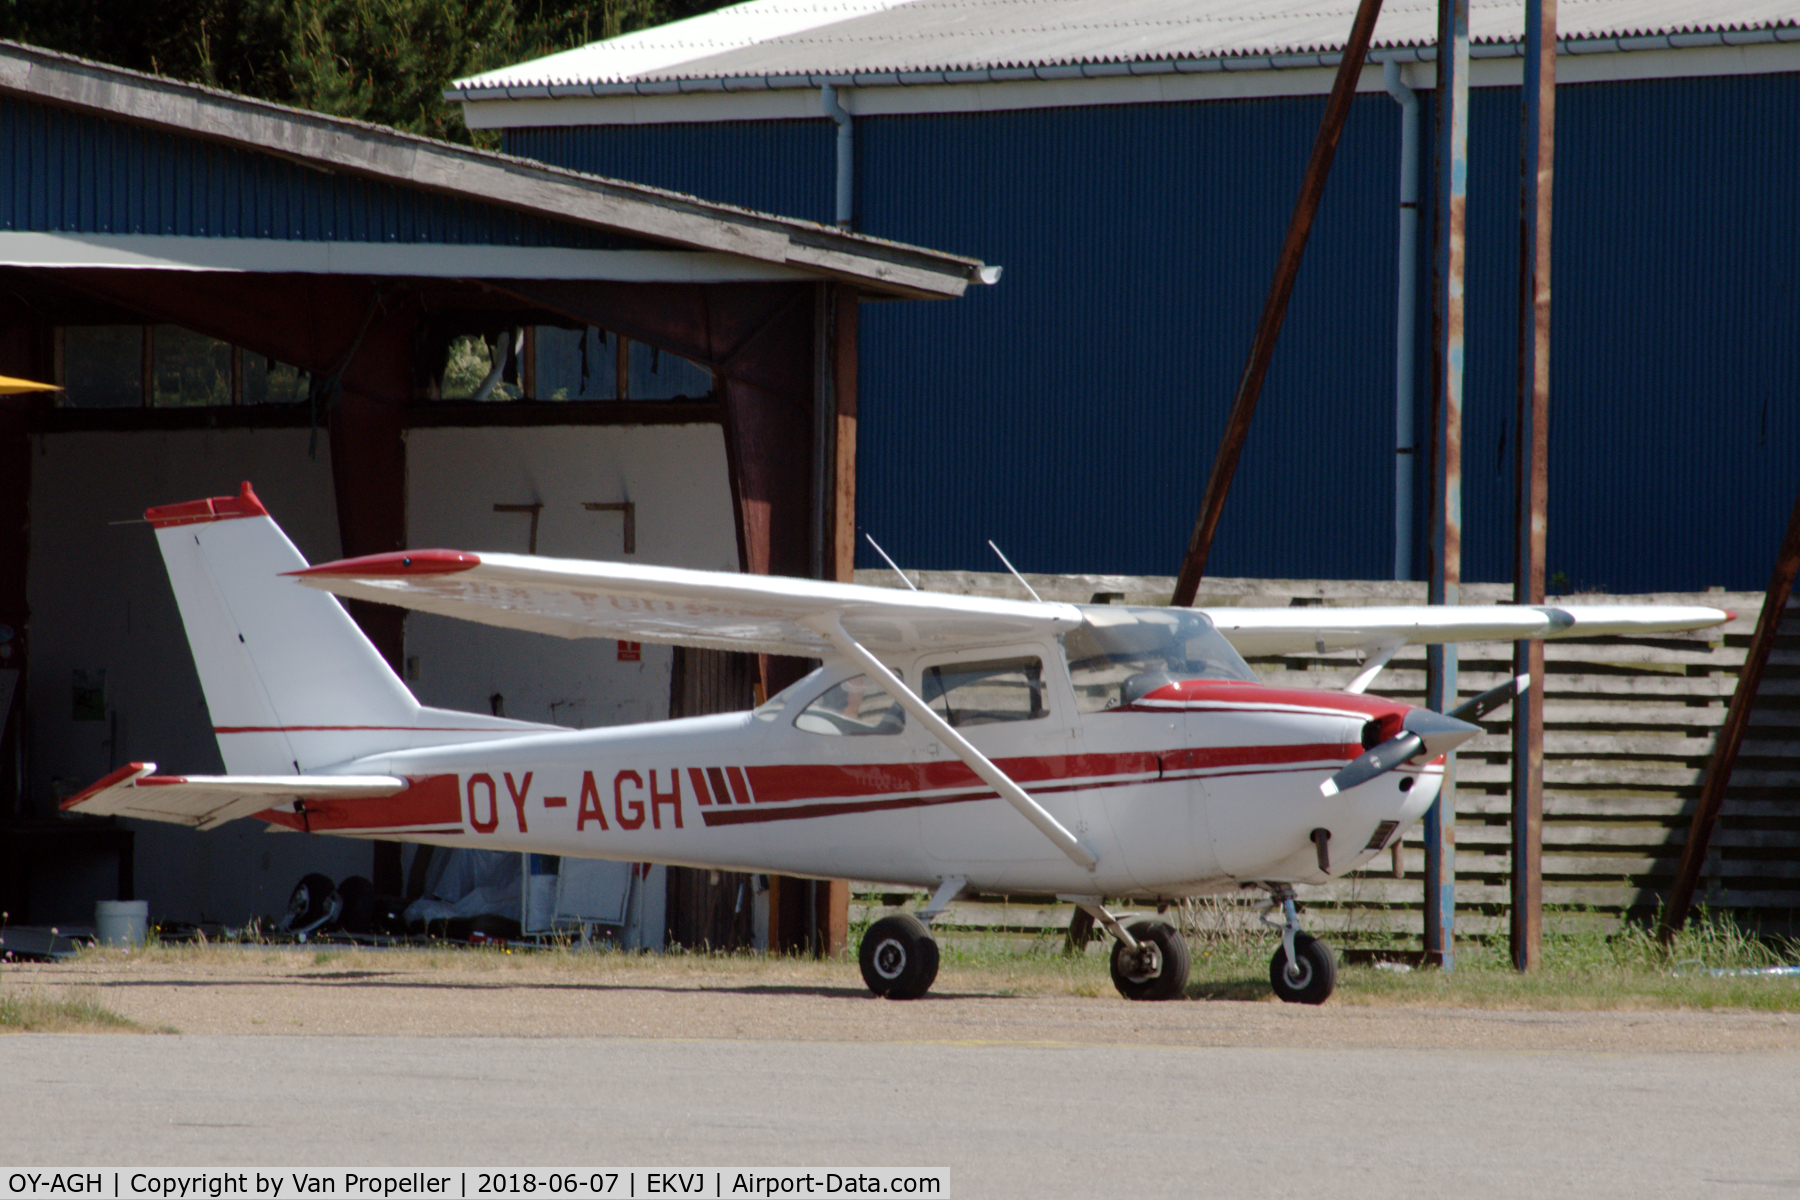 OY-AGH, 1967 Reims F172H Skyhawk C/N 485, Reims-Cessna F172H in front of its hangar at Stauning airport, Denmark